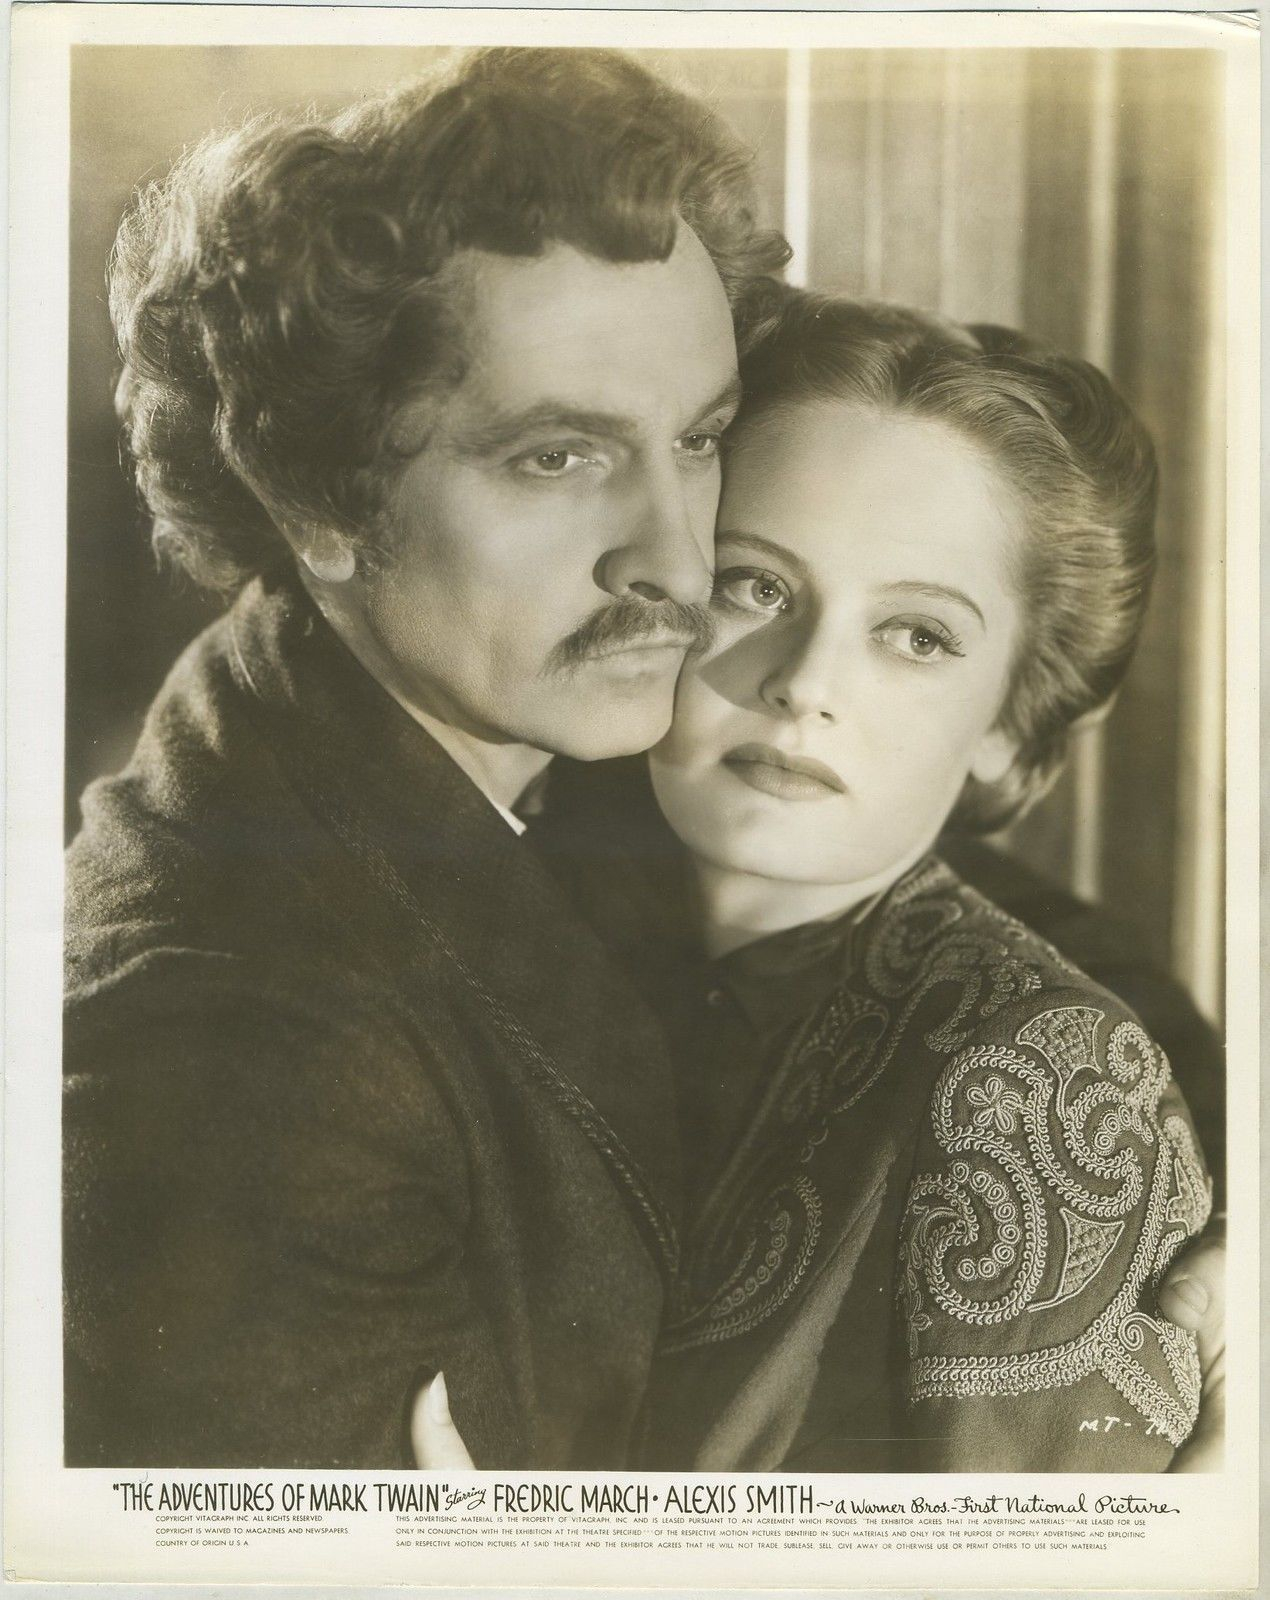 Alexis Smith and Frederic March